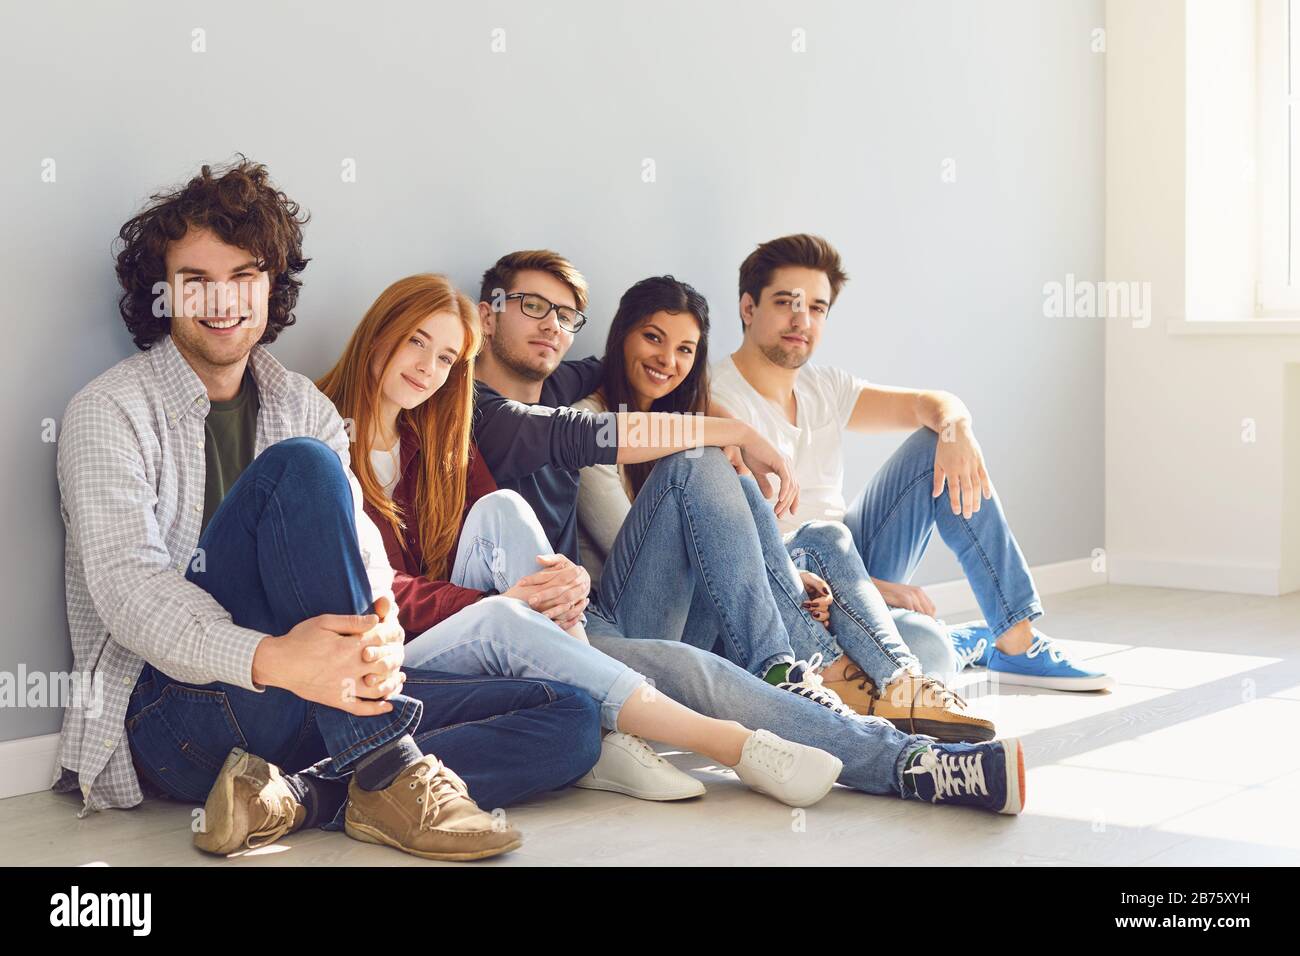 A group of friends is sitting on the floor in a room on a gray background. Stock Photo